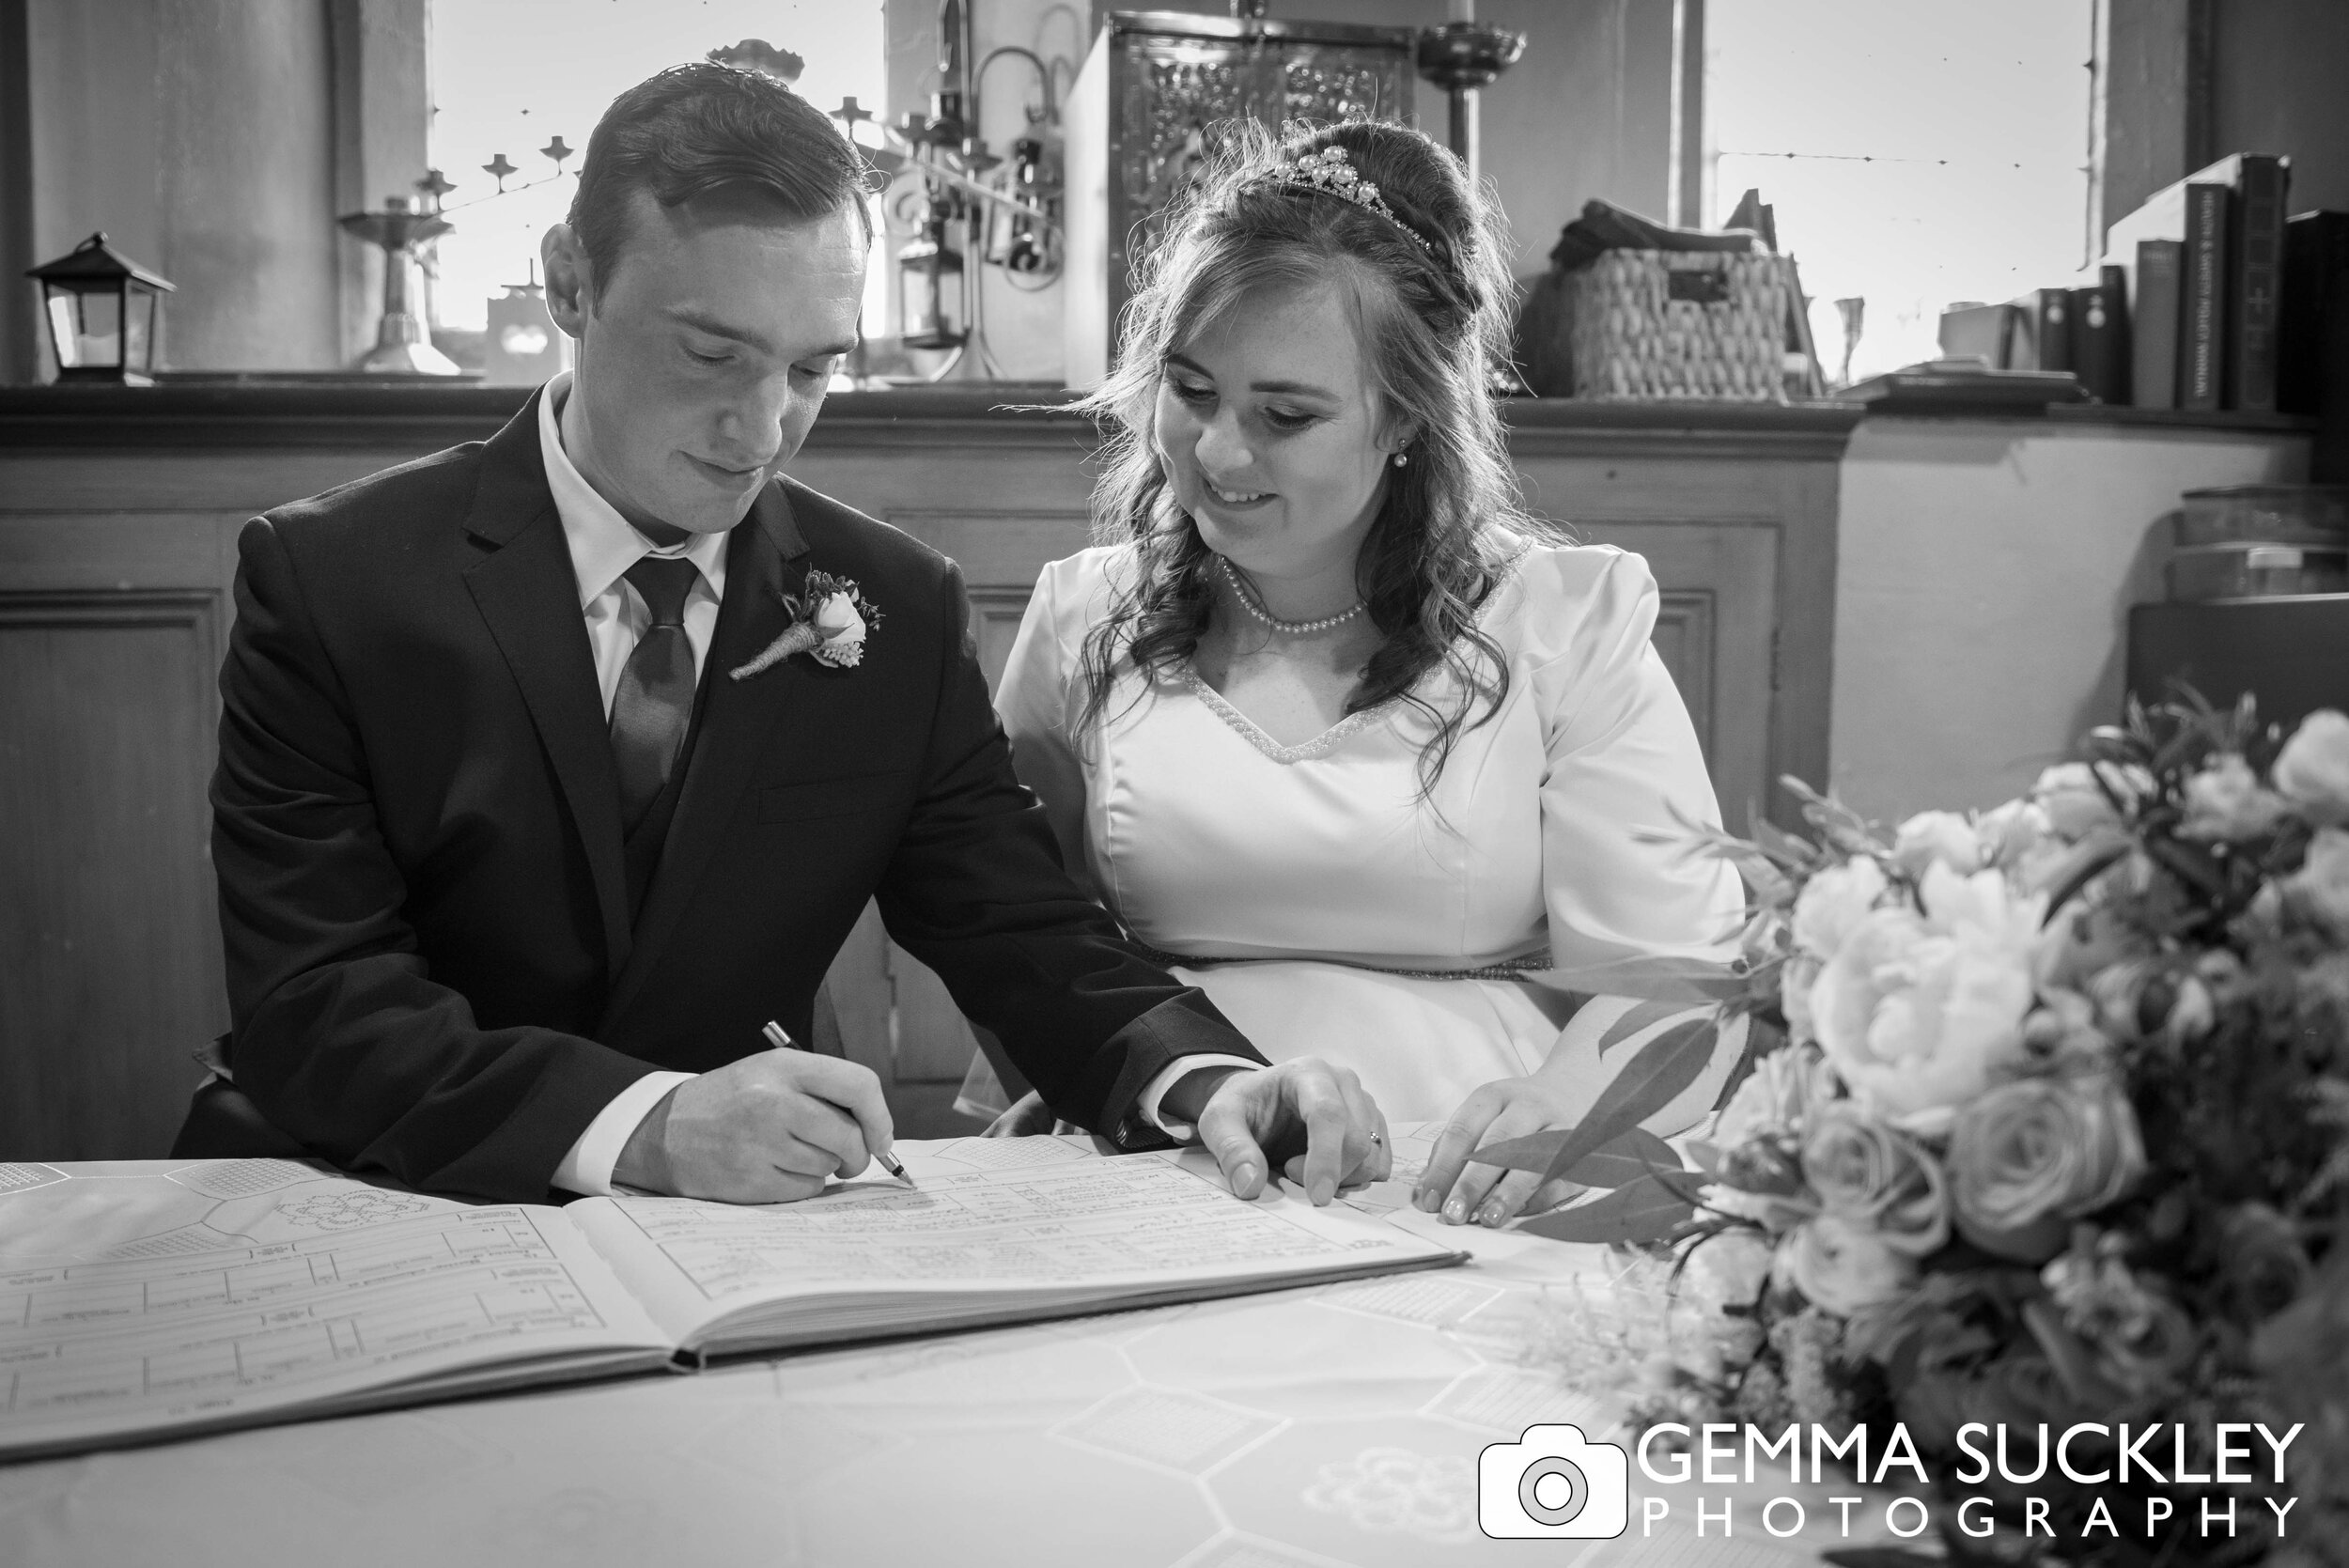 black and white wedding photo of bride and groom signing wedding the register